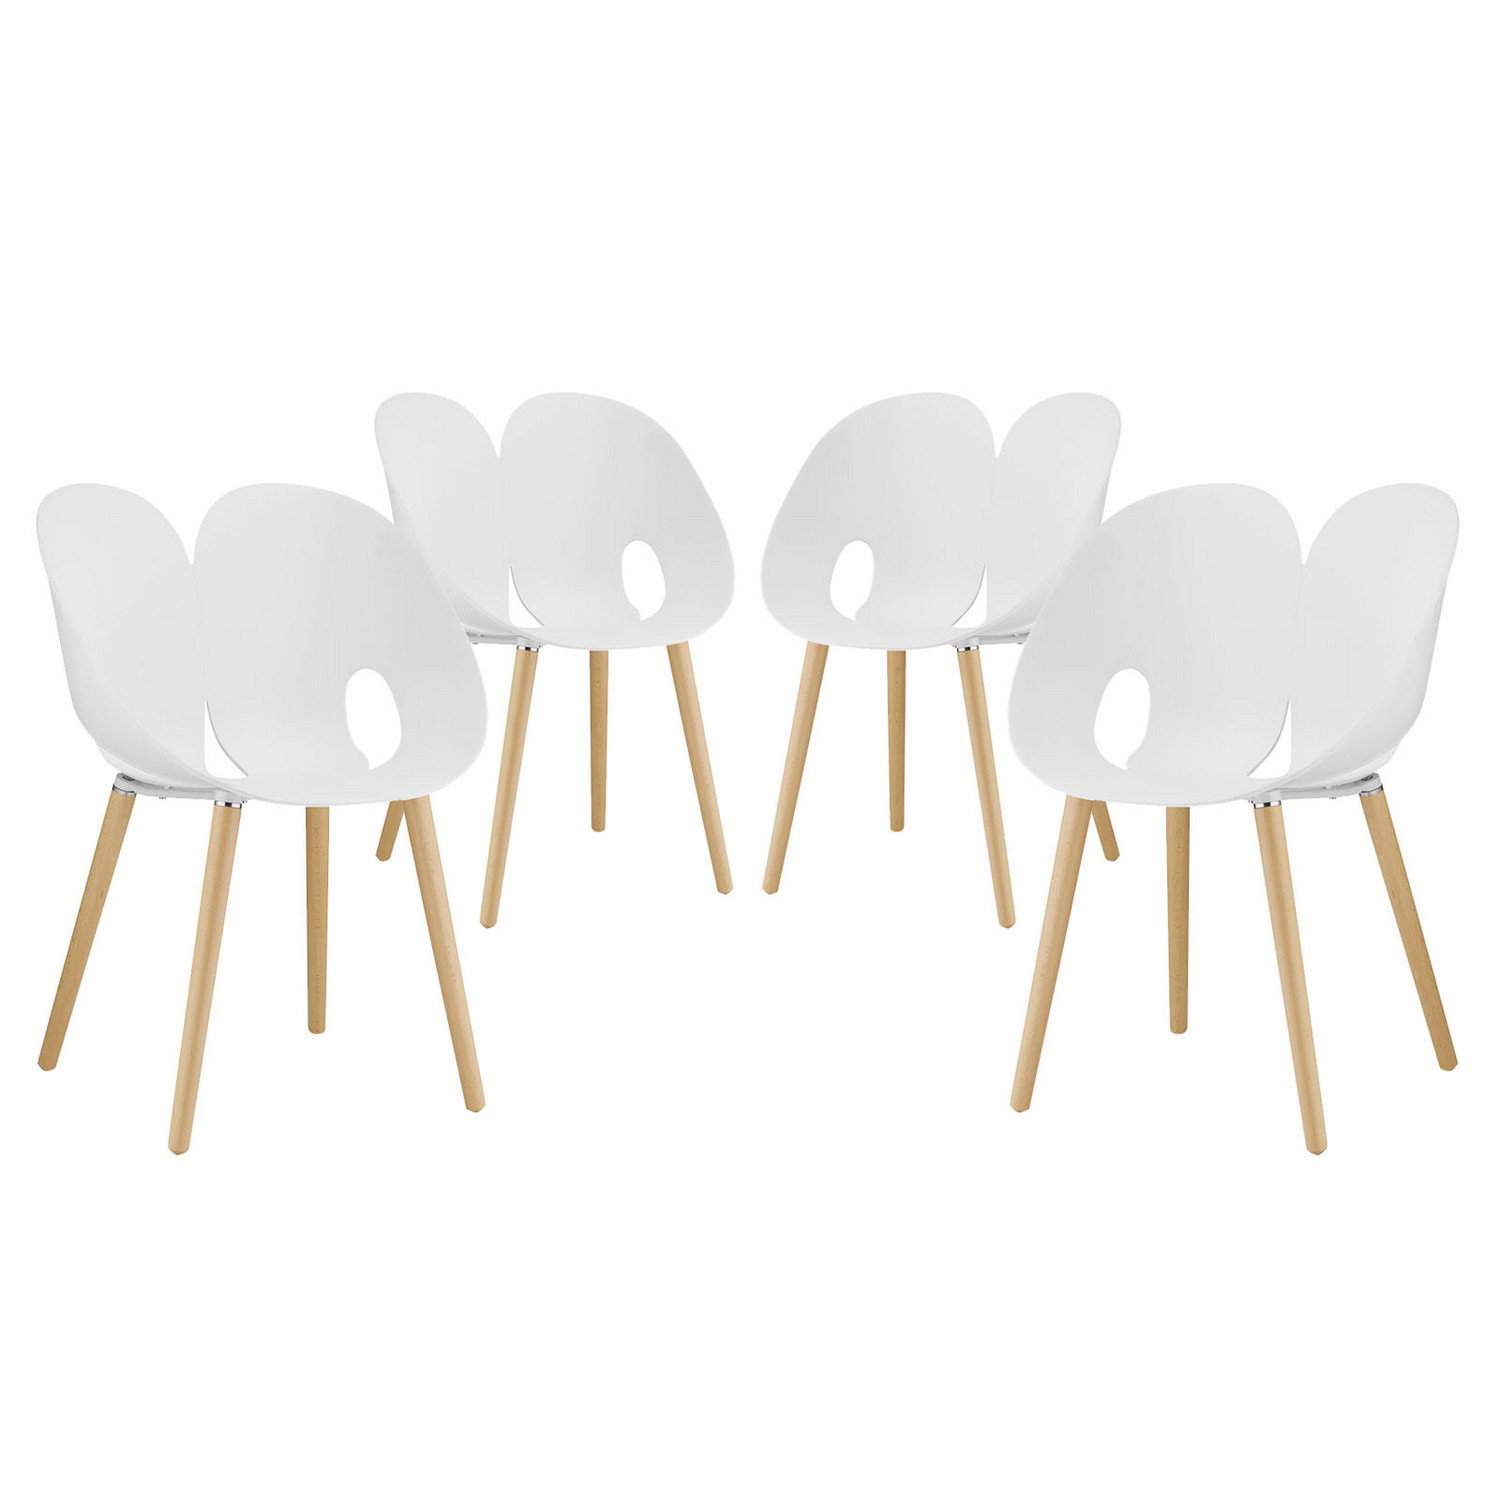 Modway Envelope Dining Chair - Set of 4 - White